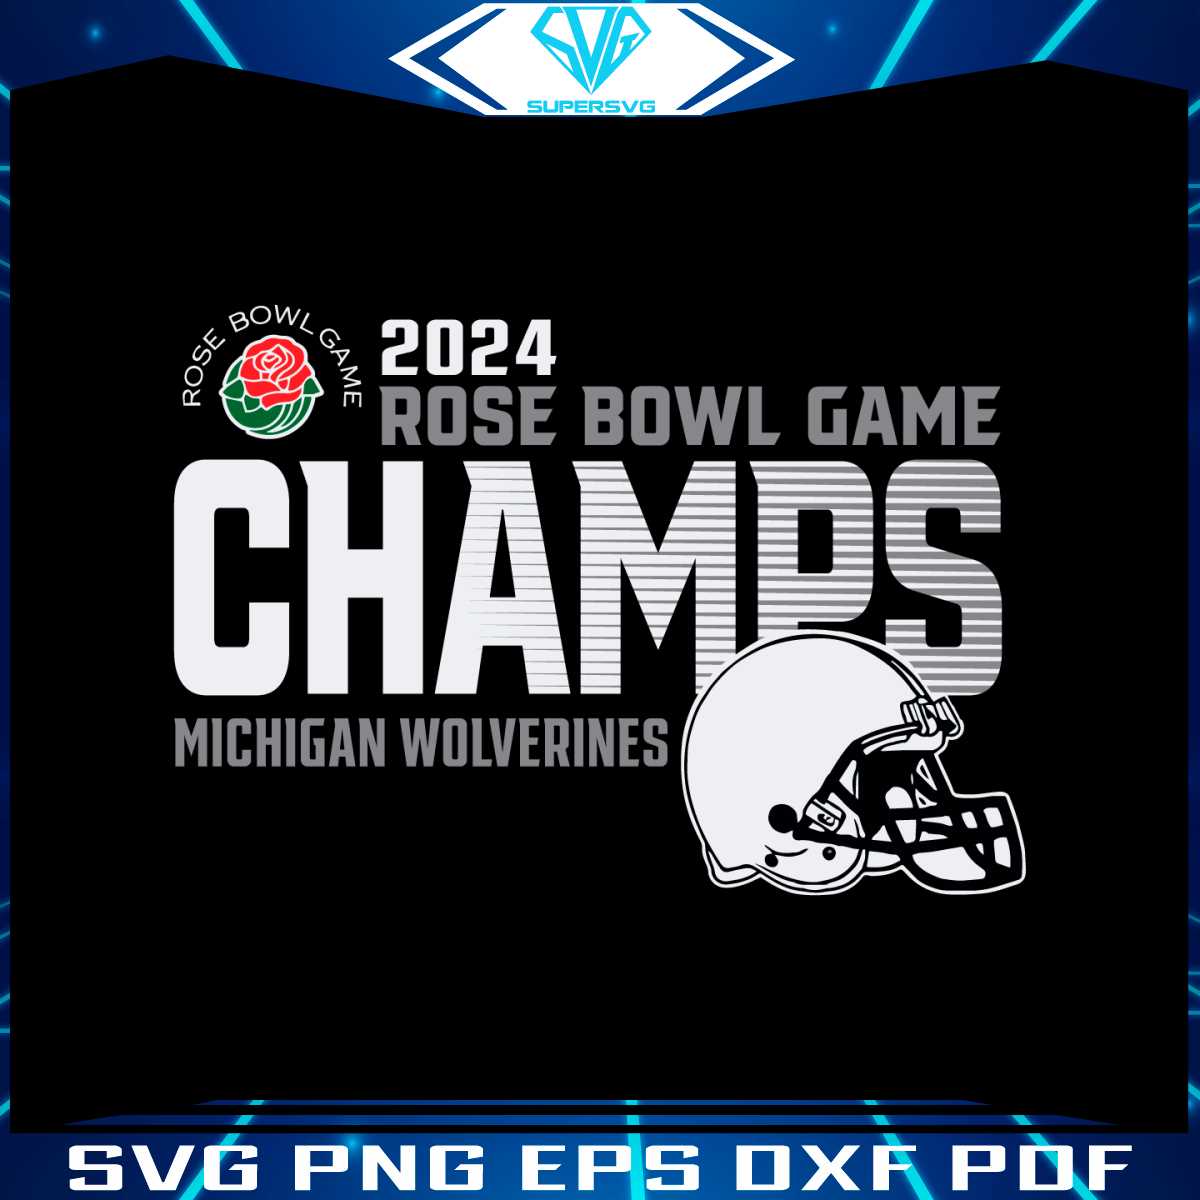 2024 Rose Bowl Game Champs Michigan Wolverines SVG